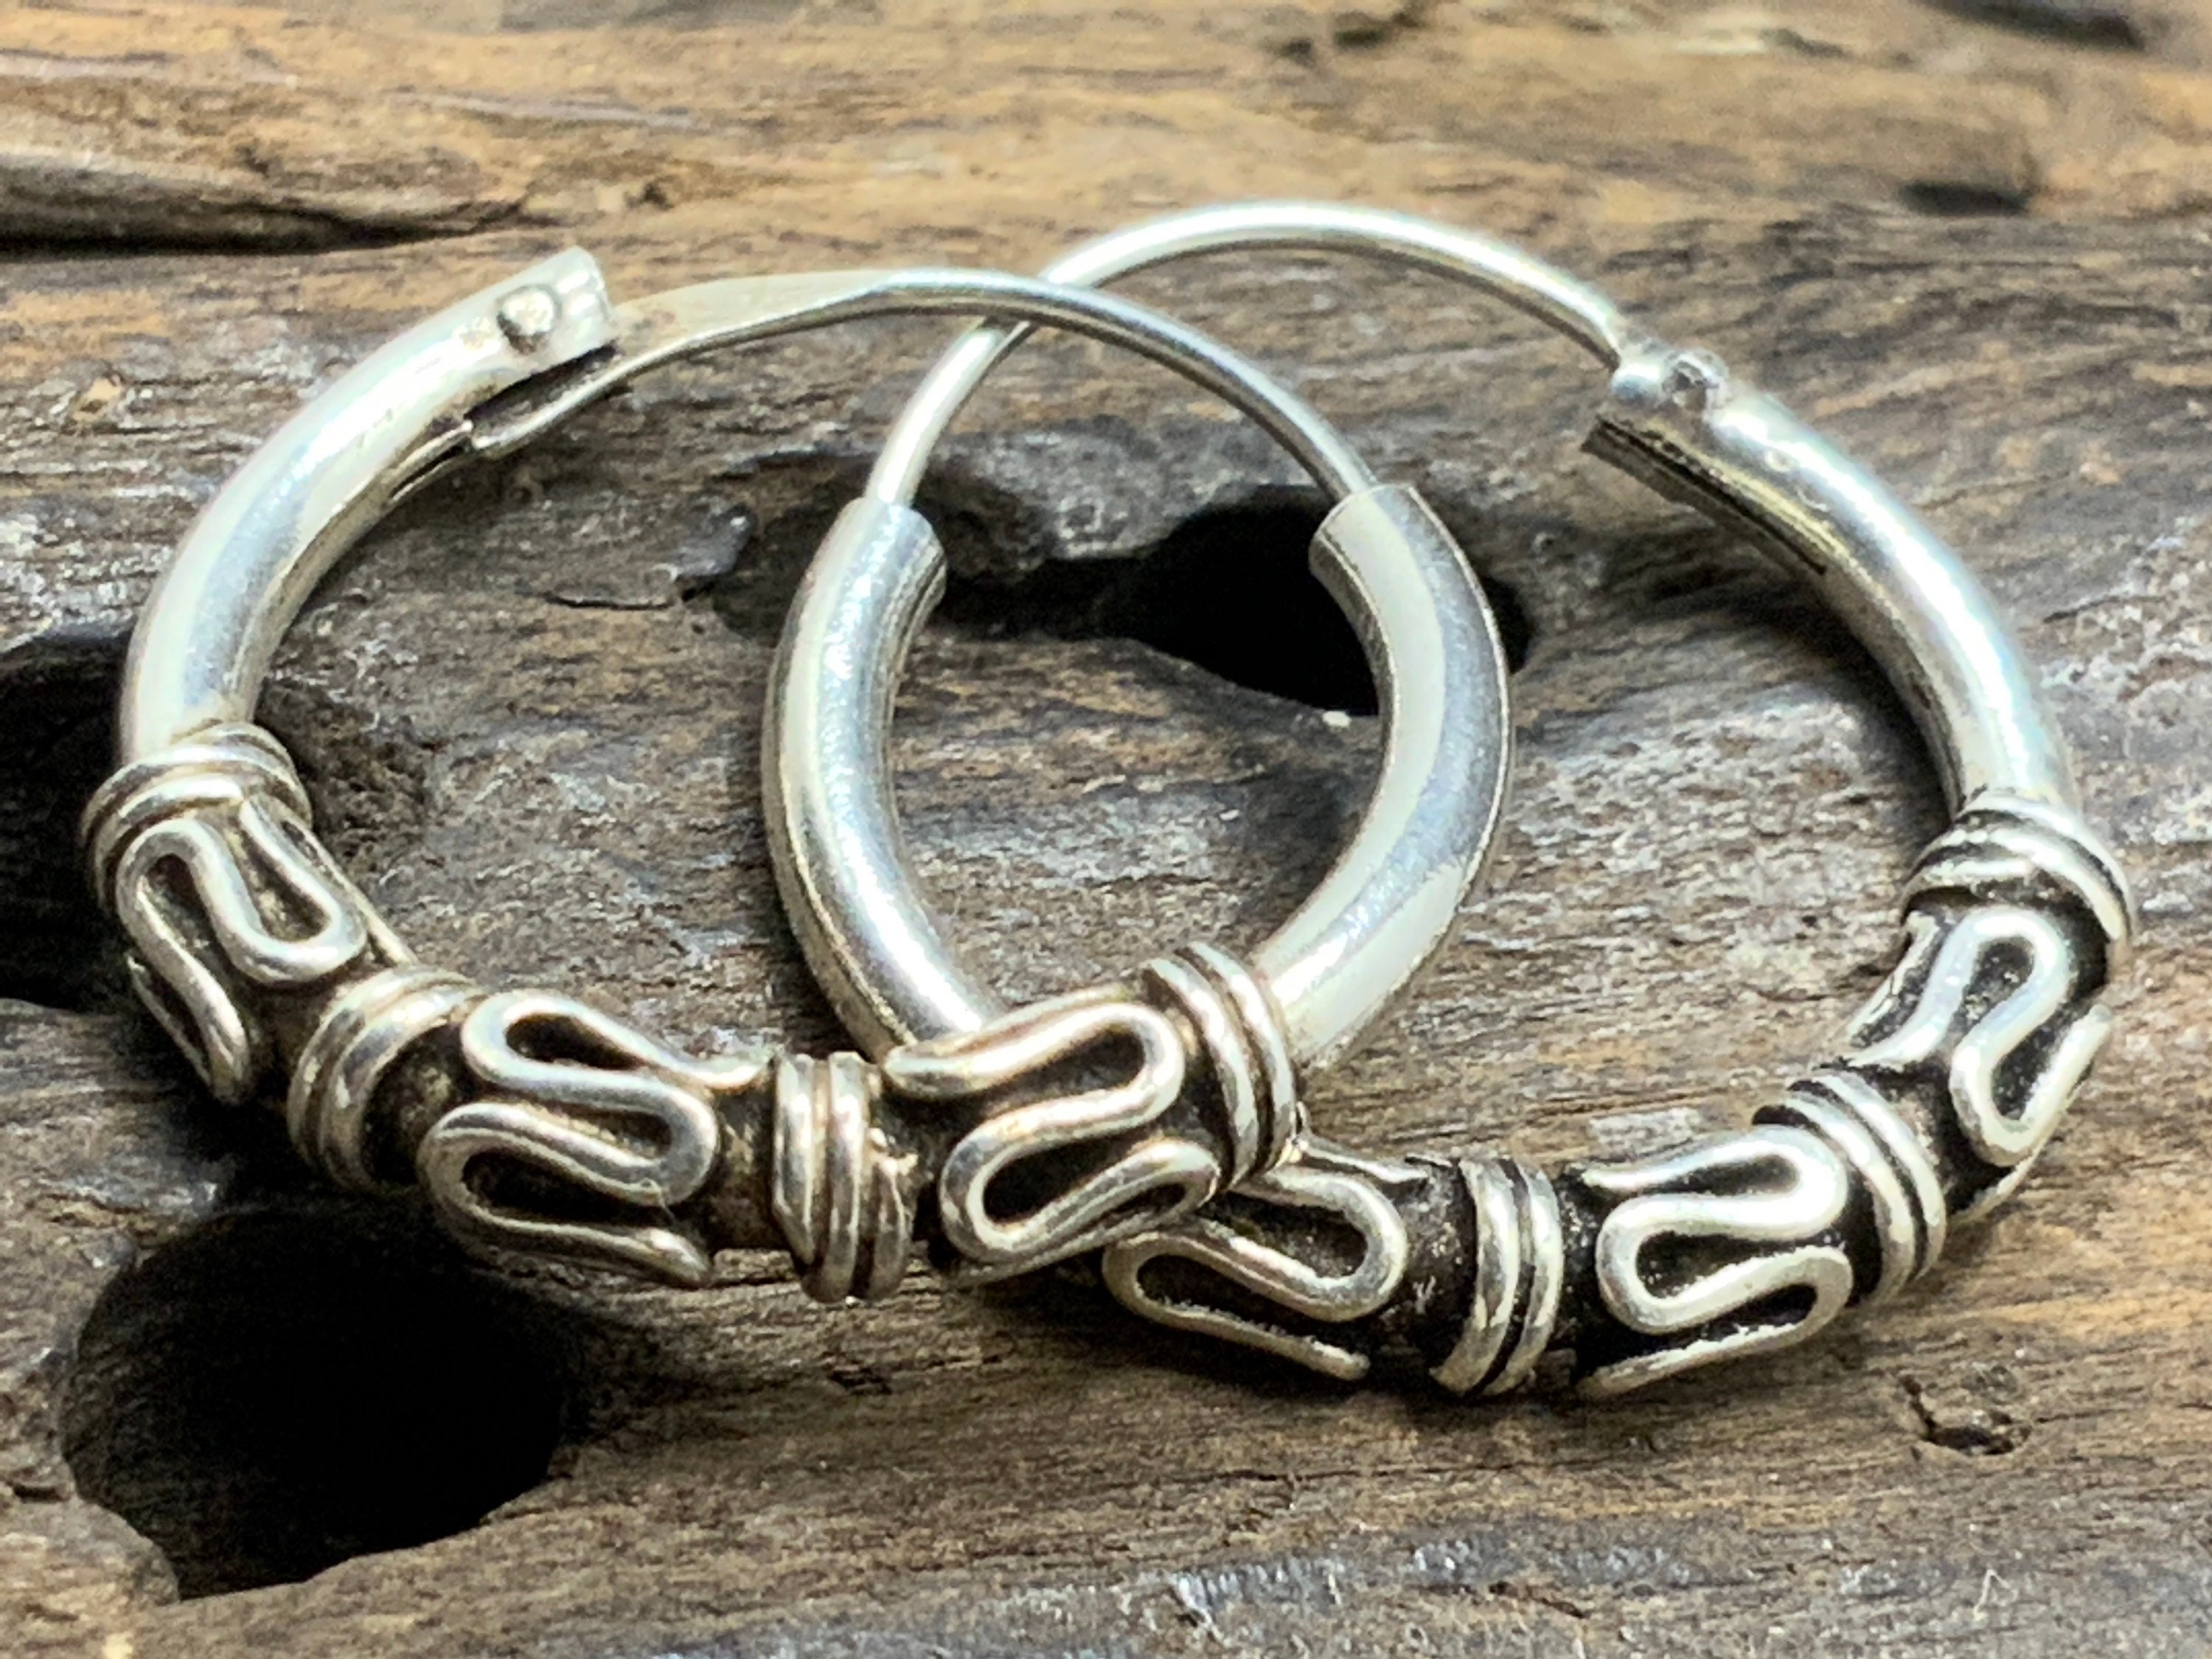 12 mm Sterling Silver Gypsy Hoop Earrings - Silver, Gold and Rose gold